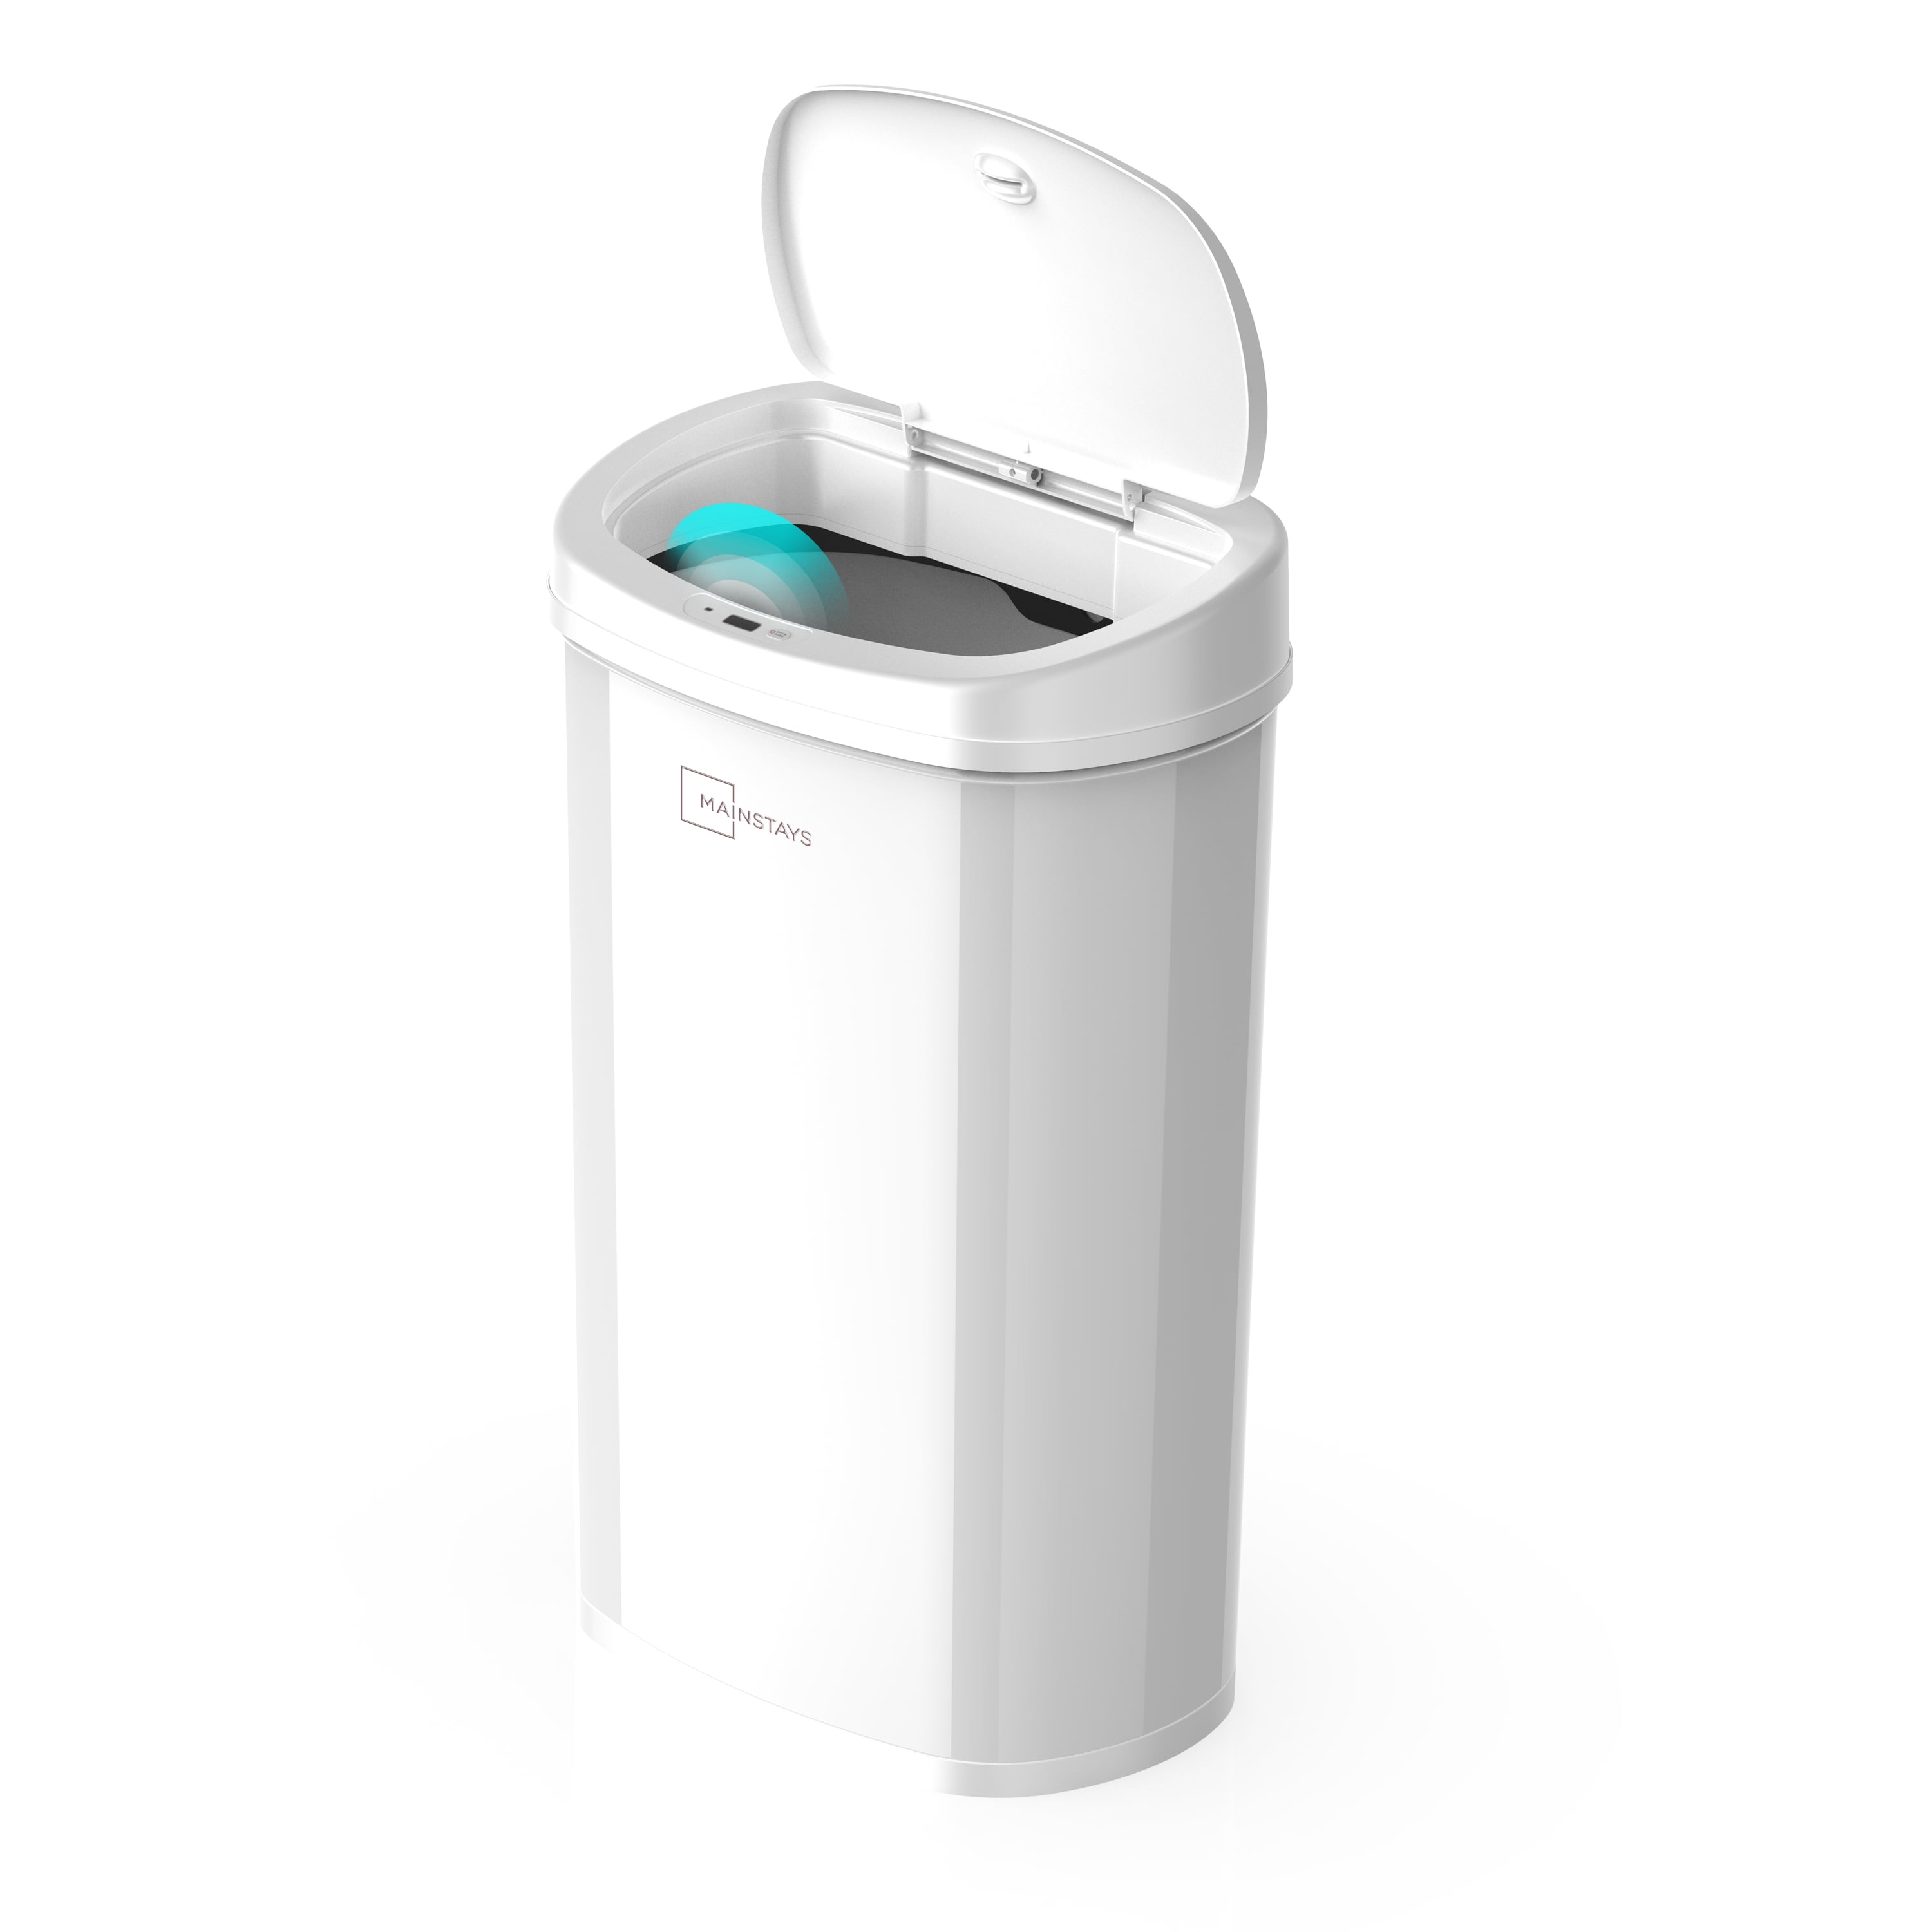 Homary Automatic Touchless Motion Sensor Trash Can White Smart Garbage Can for Bathroom Kitchen